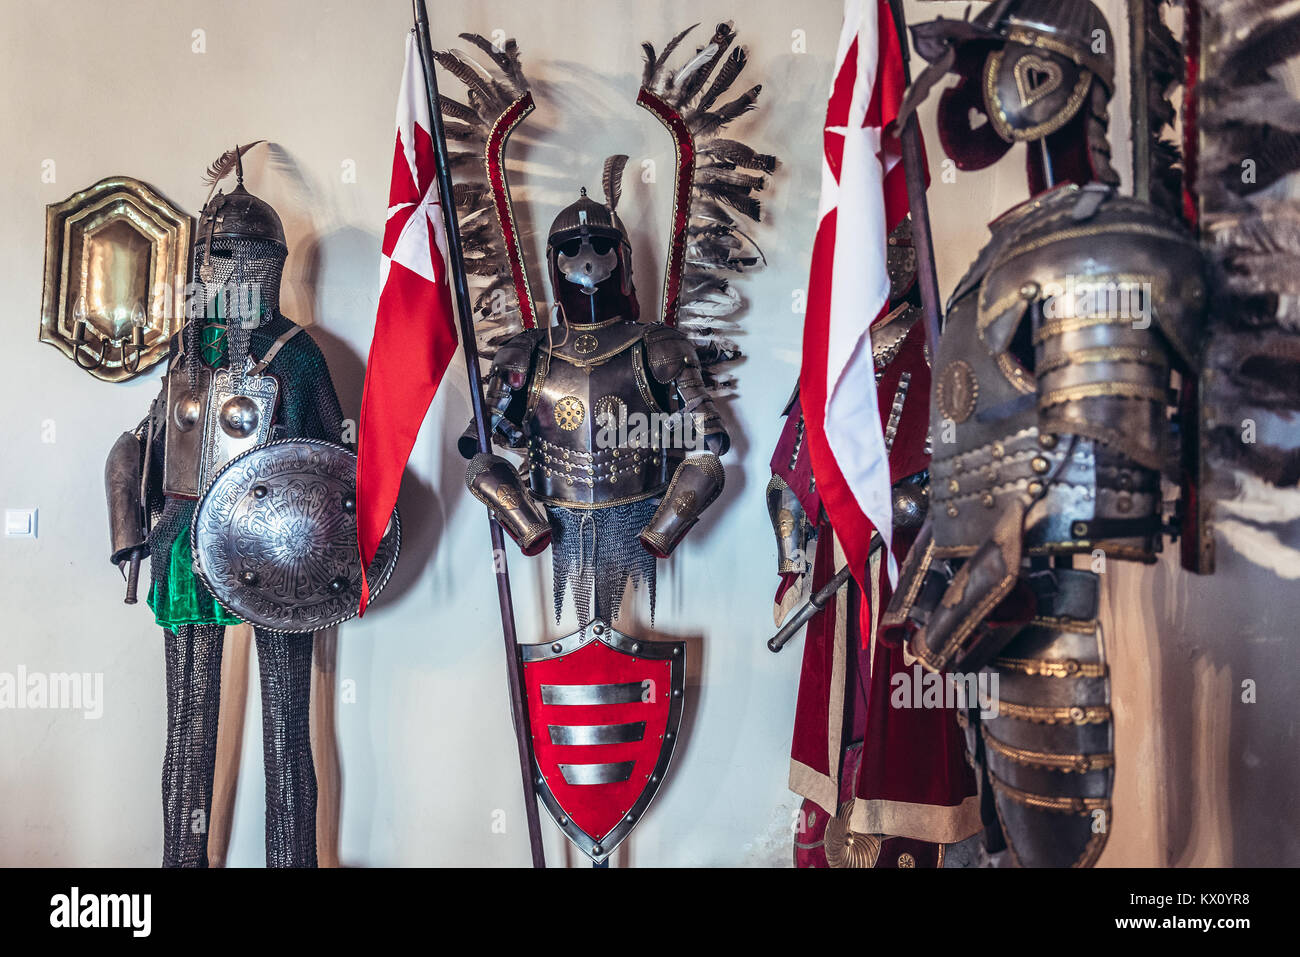 Exhibit in restored castle in Bobolice village, part of the Eagles Nests castle system in Silesian Voivodeship of southern Poland Stock Photo